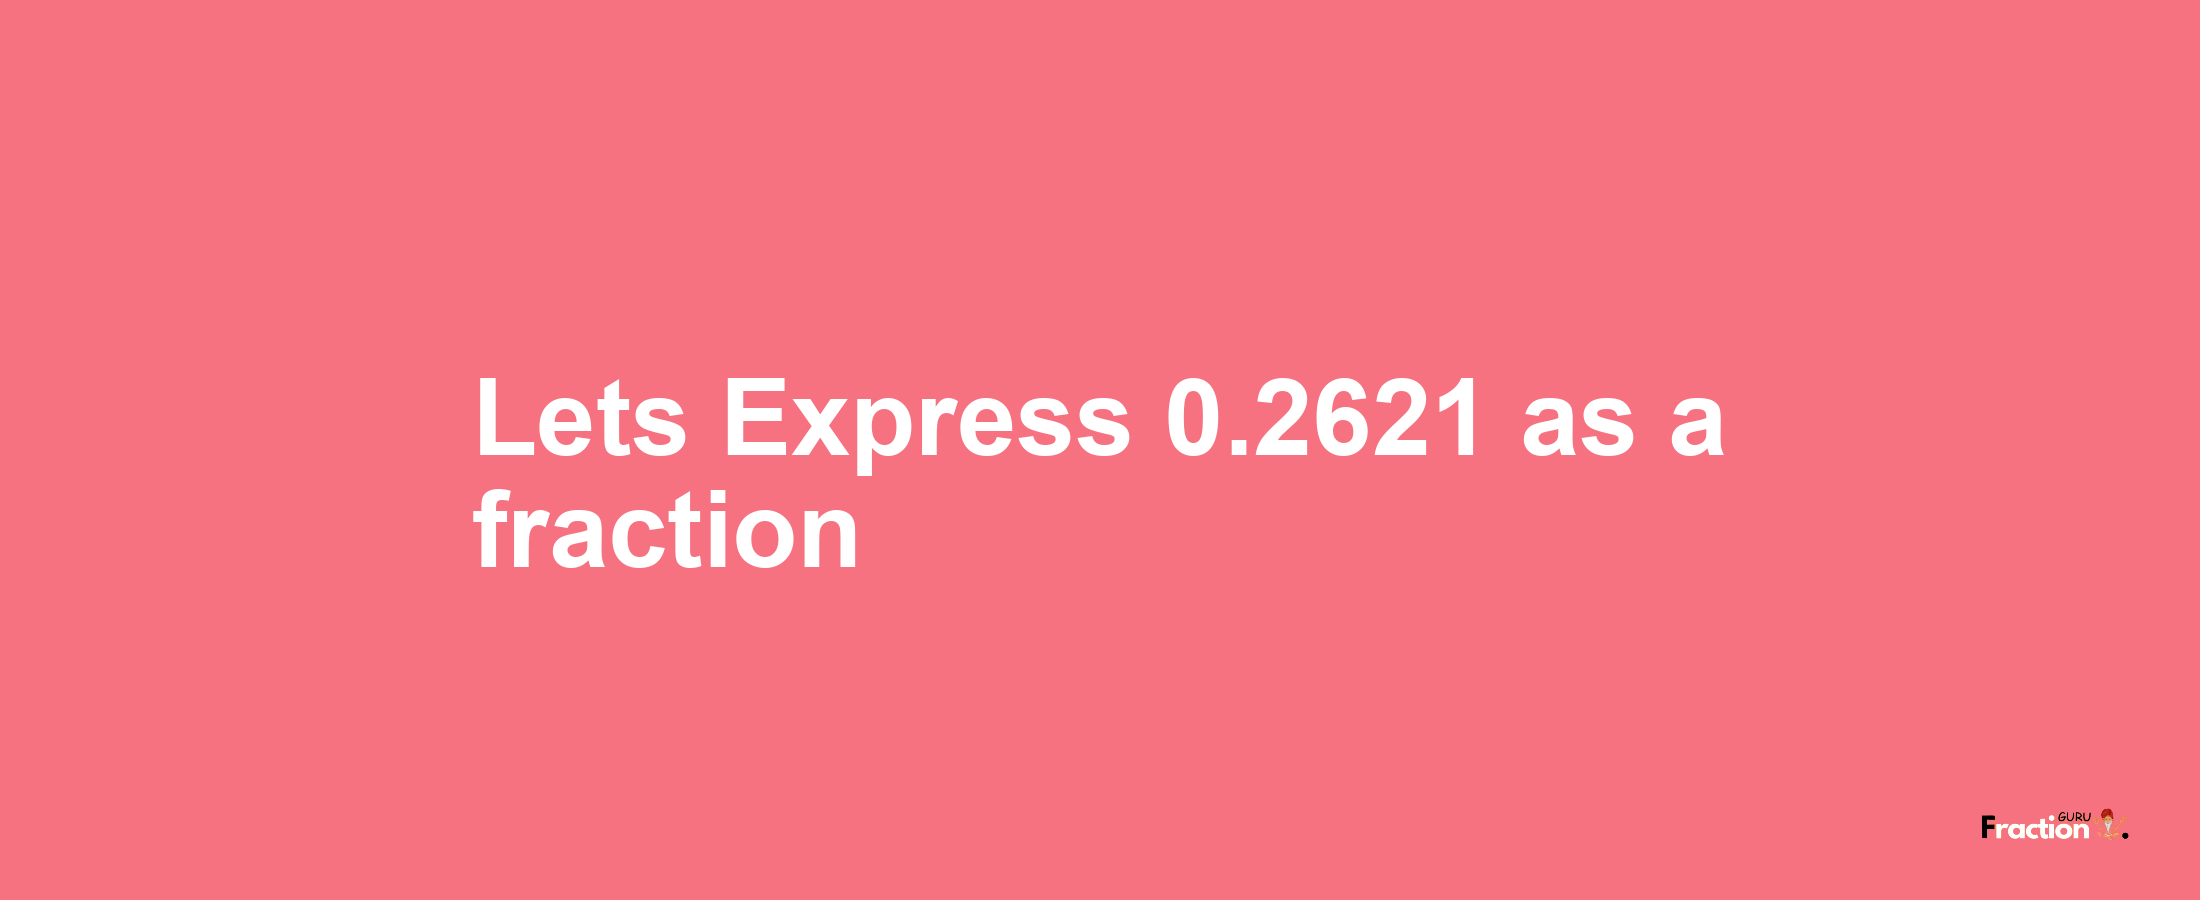 Lets Express 0.2621 as afraction